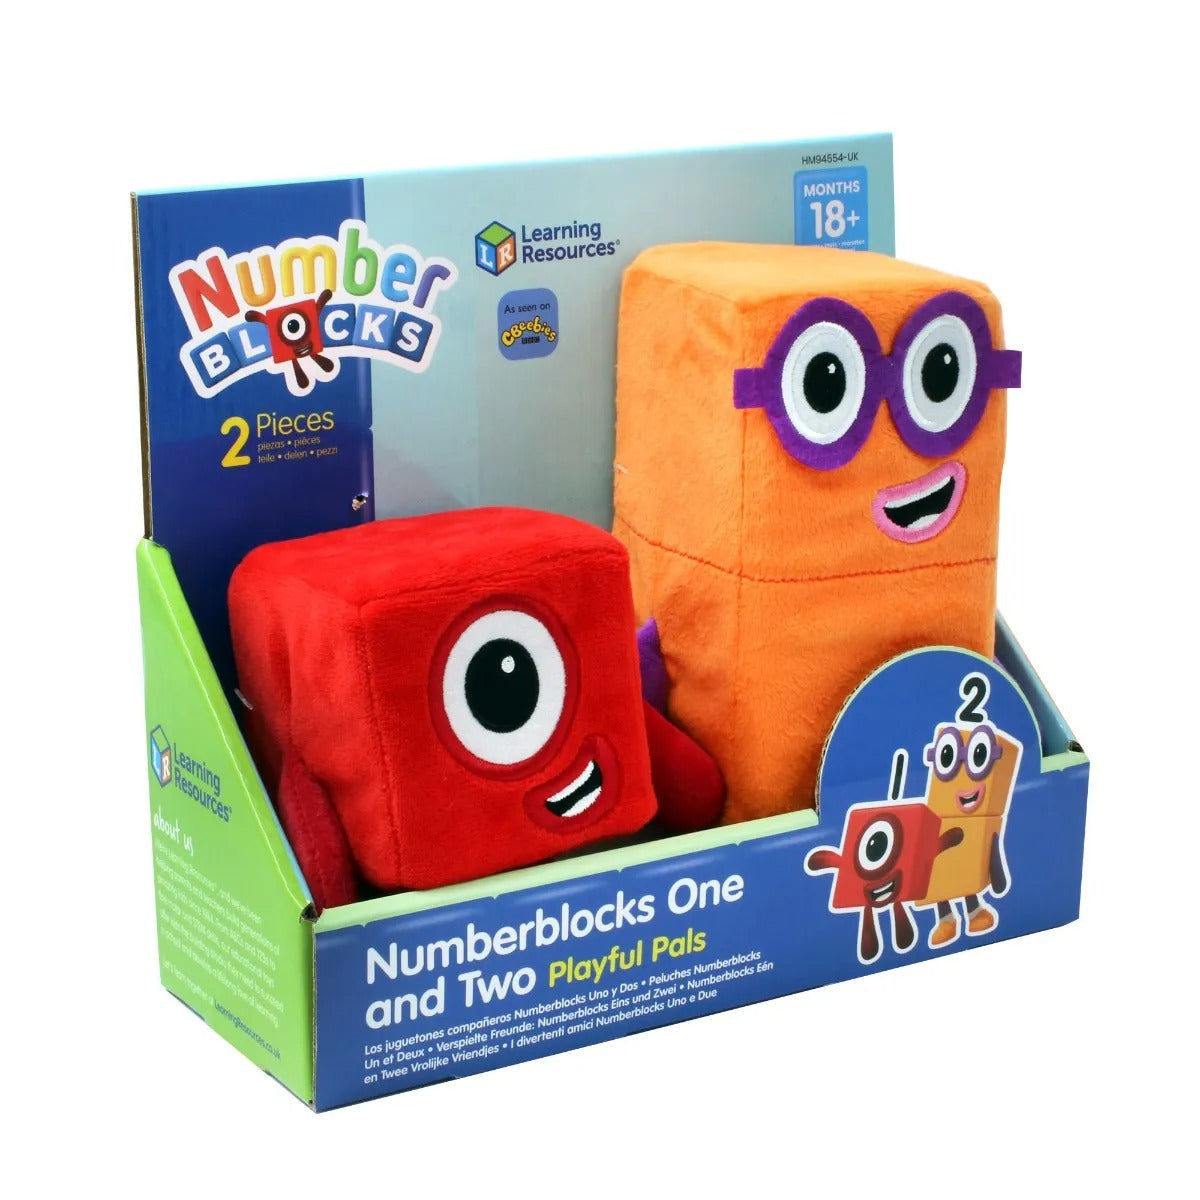 Numberblocks One And Two Playful Pals, Bring the on-screen magic of the Numberblocks to life for young fans of the award-winning CBeebies TV series with the Numberblocks One and Two Playful Pals plush toys. Made from super-soft plush fabric and with embroidered features, they’re ready for cuddles and snuggles. These plush toys are stuffed with high quality foam to keep their shape, with securely attached limbs, and will be fun, cuddly companions for years to come. Spark your child’s imagination with these f